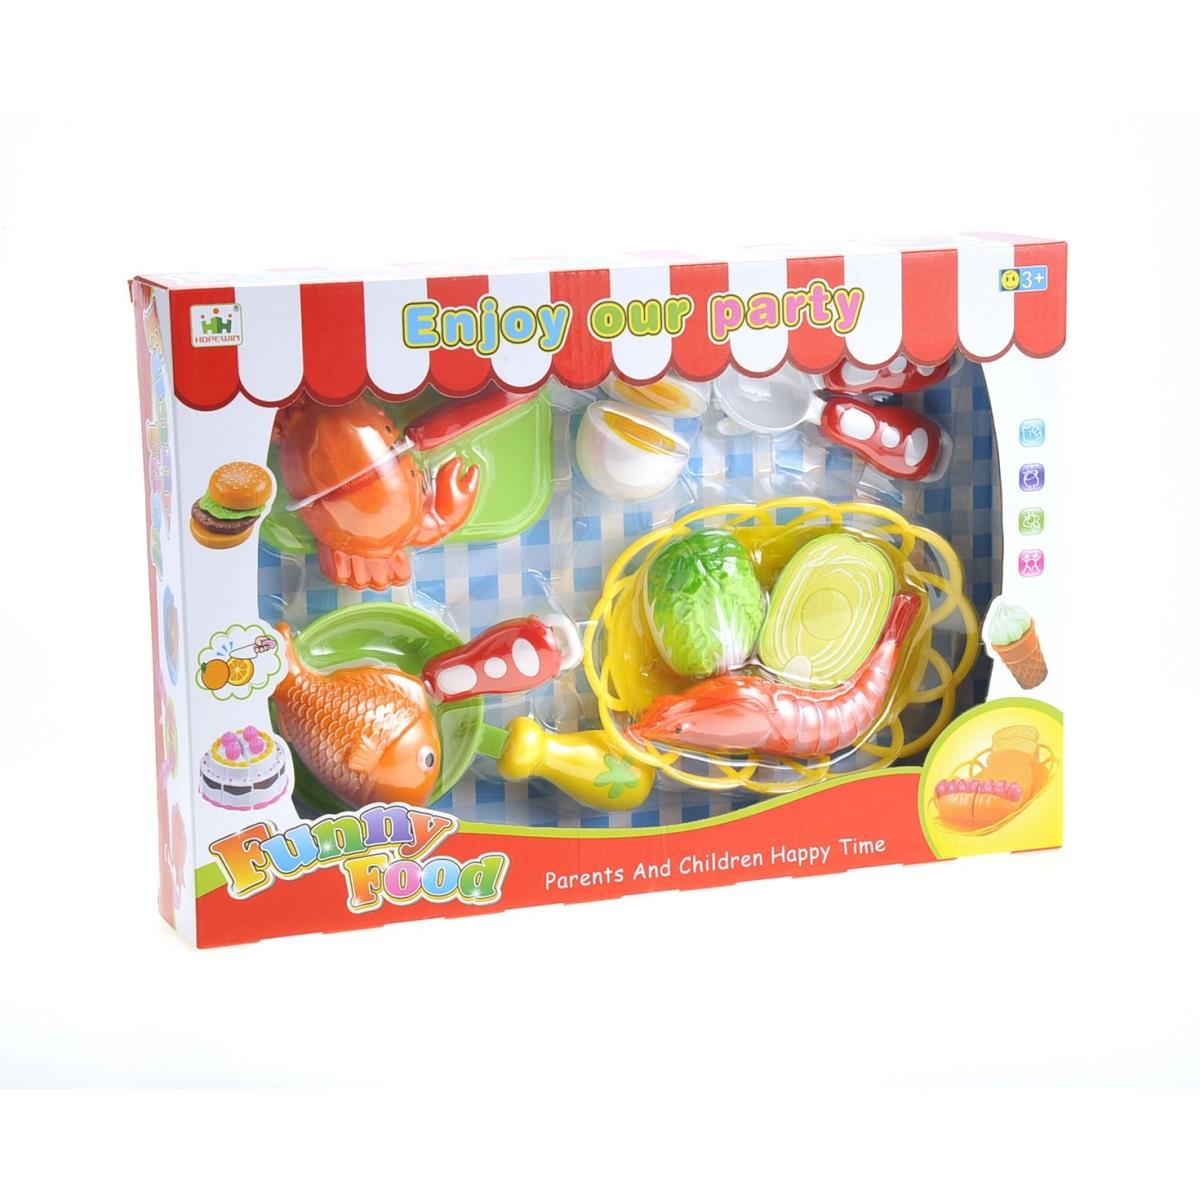 Picture of Azimport PSB18 Kitchen Fun Seafood Hot Pot Dinner Cutting Food Play Set for Kids with Egg & Vegetable